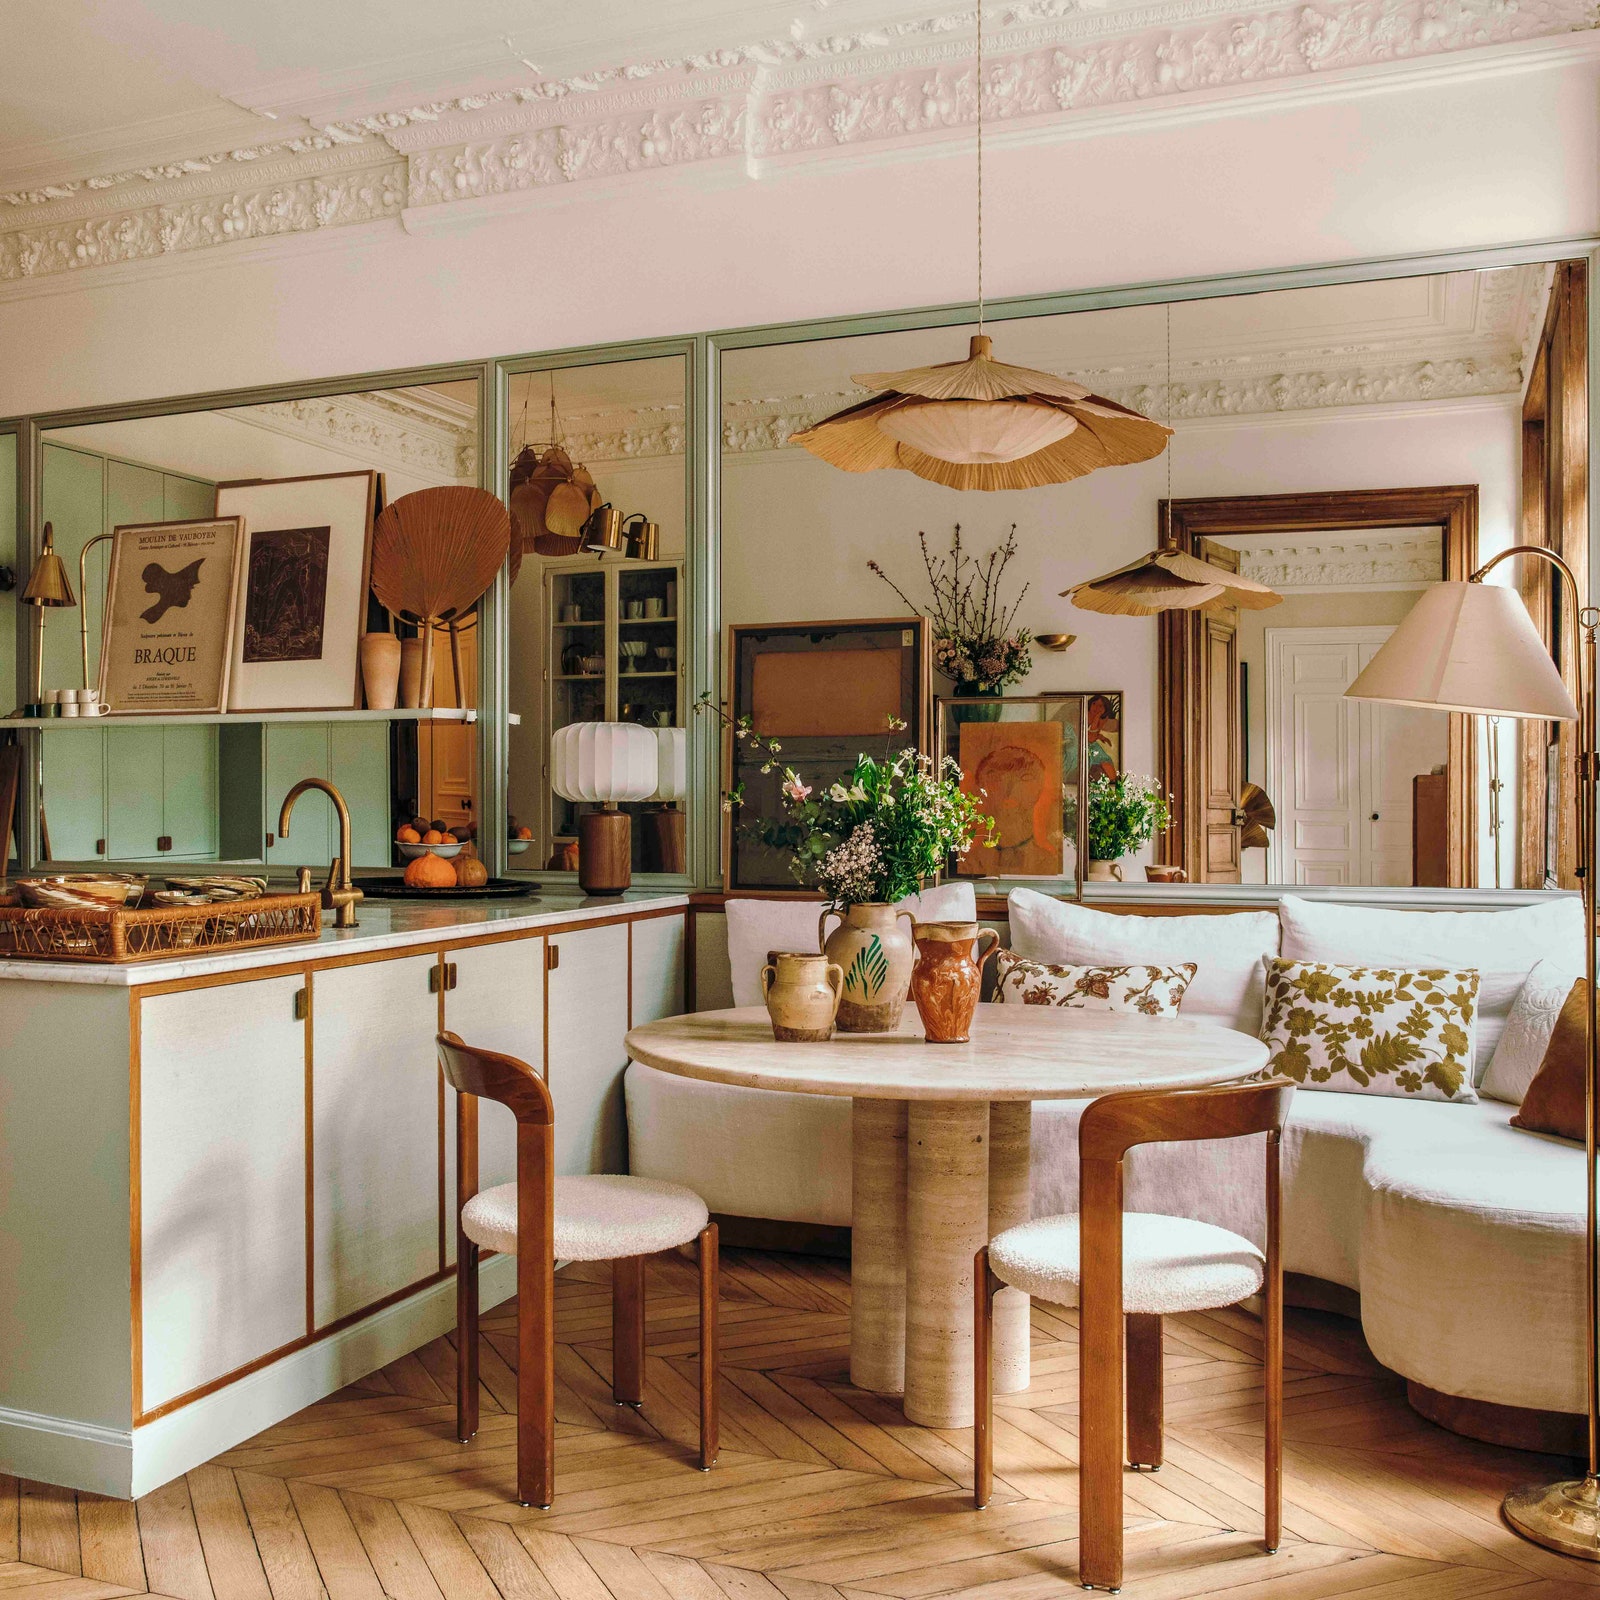 Step inside the vintage-inspired Paris home of a French fashion designer